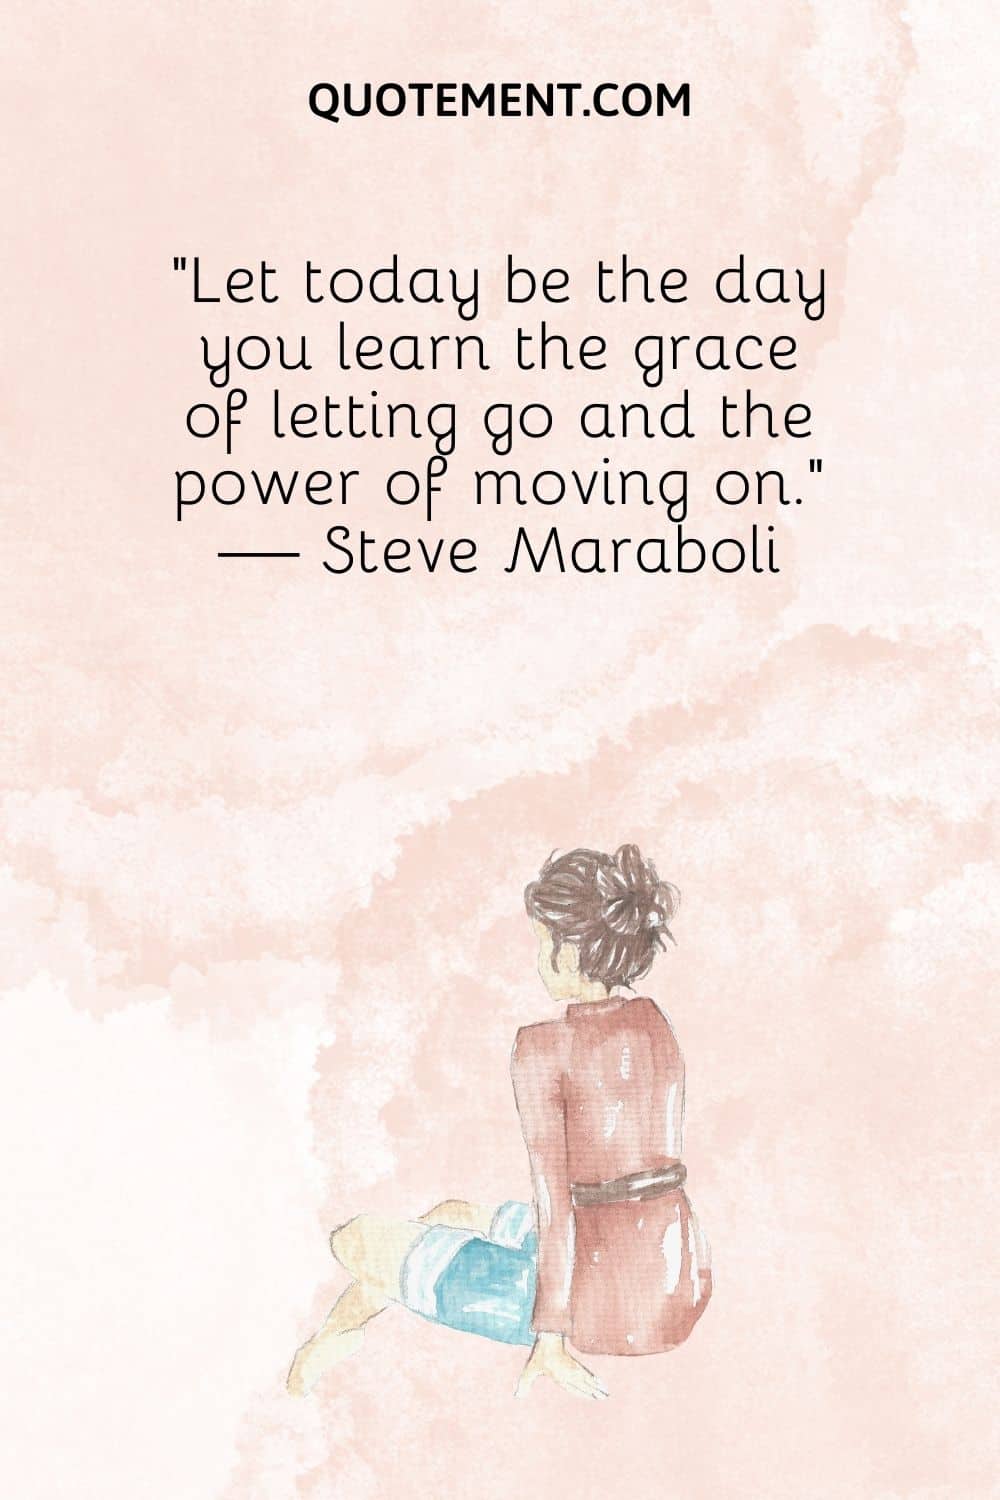 Let today be the day you learn the grace of letting go and the power of moving on